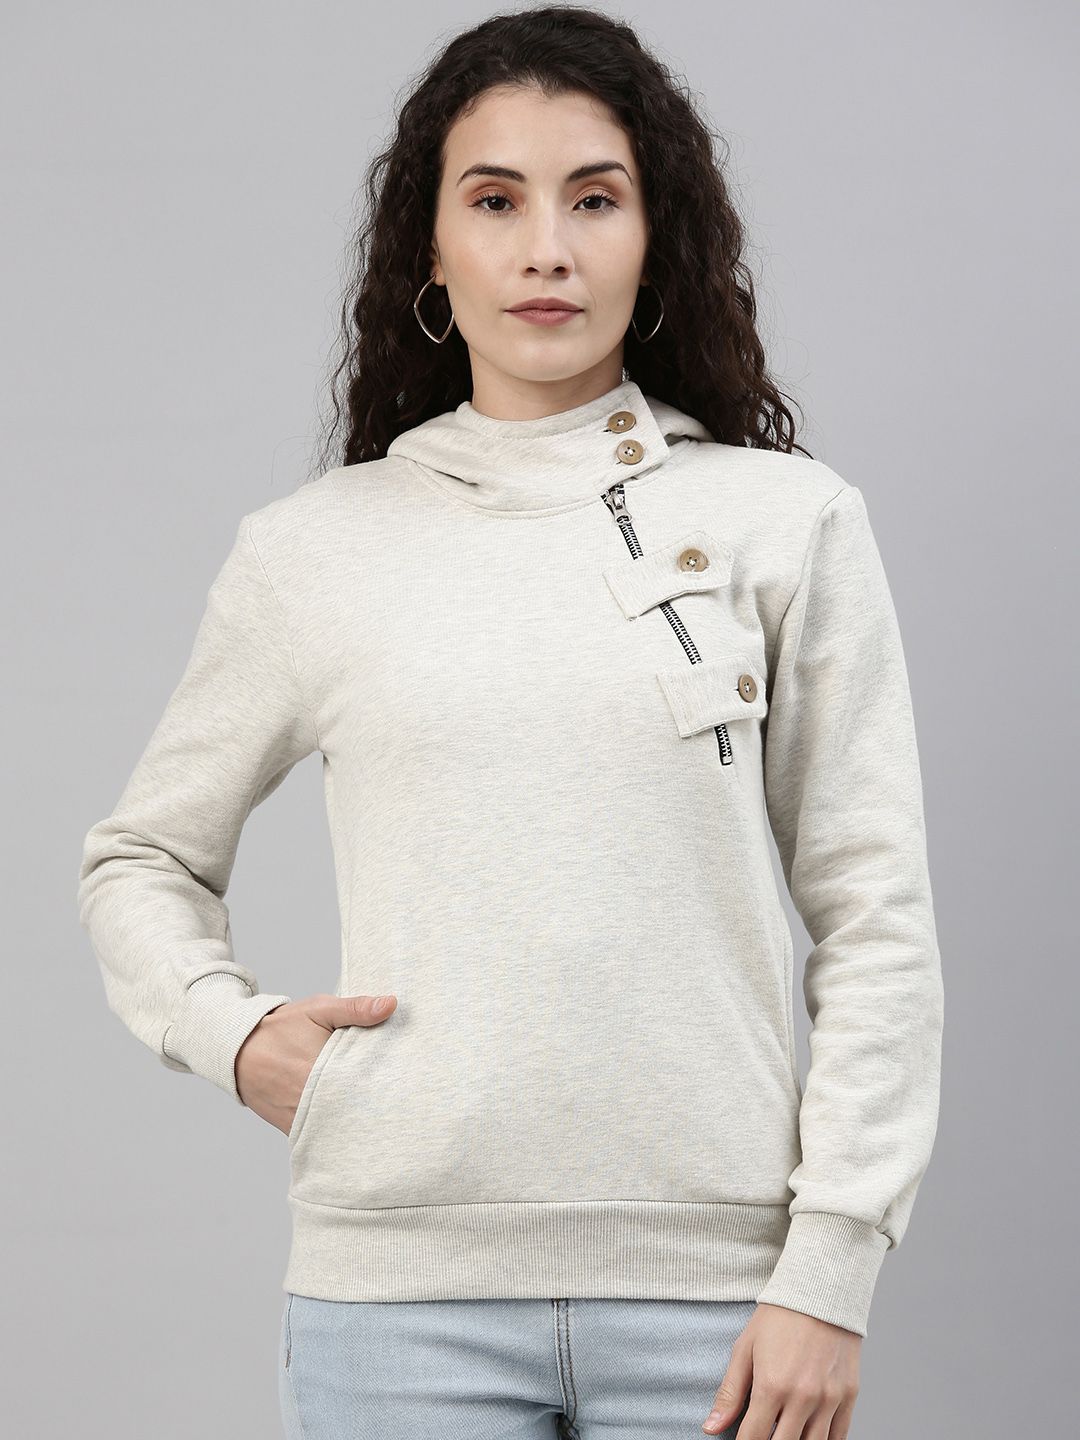 Campus Sutra Women Grey Windcheater Outdoor Tailored Jacket Price in India